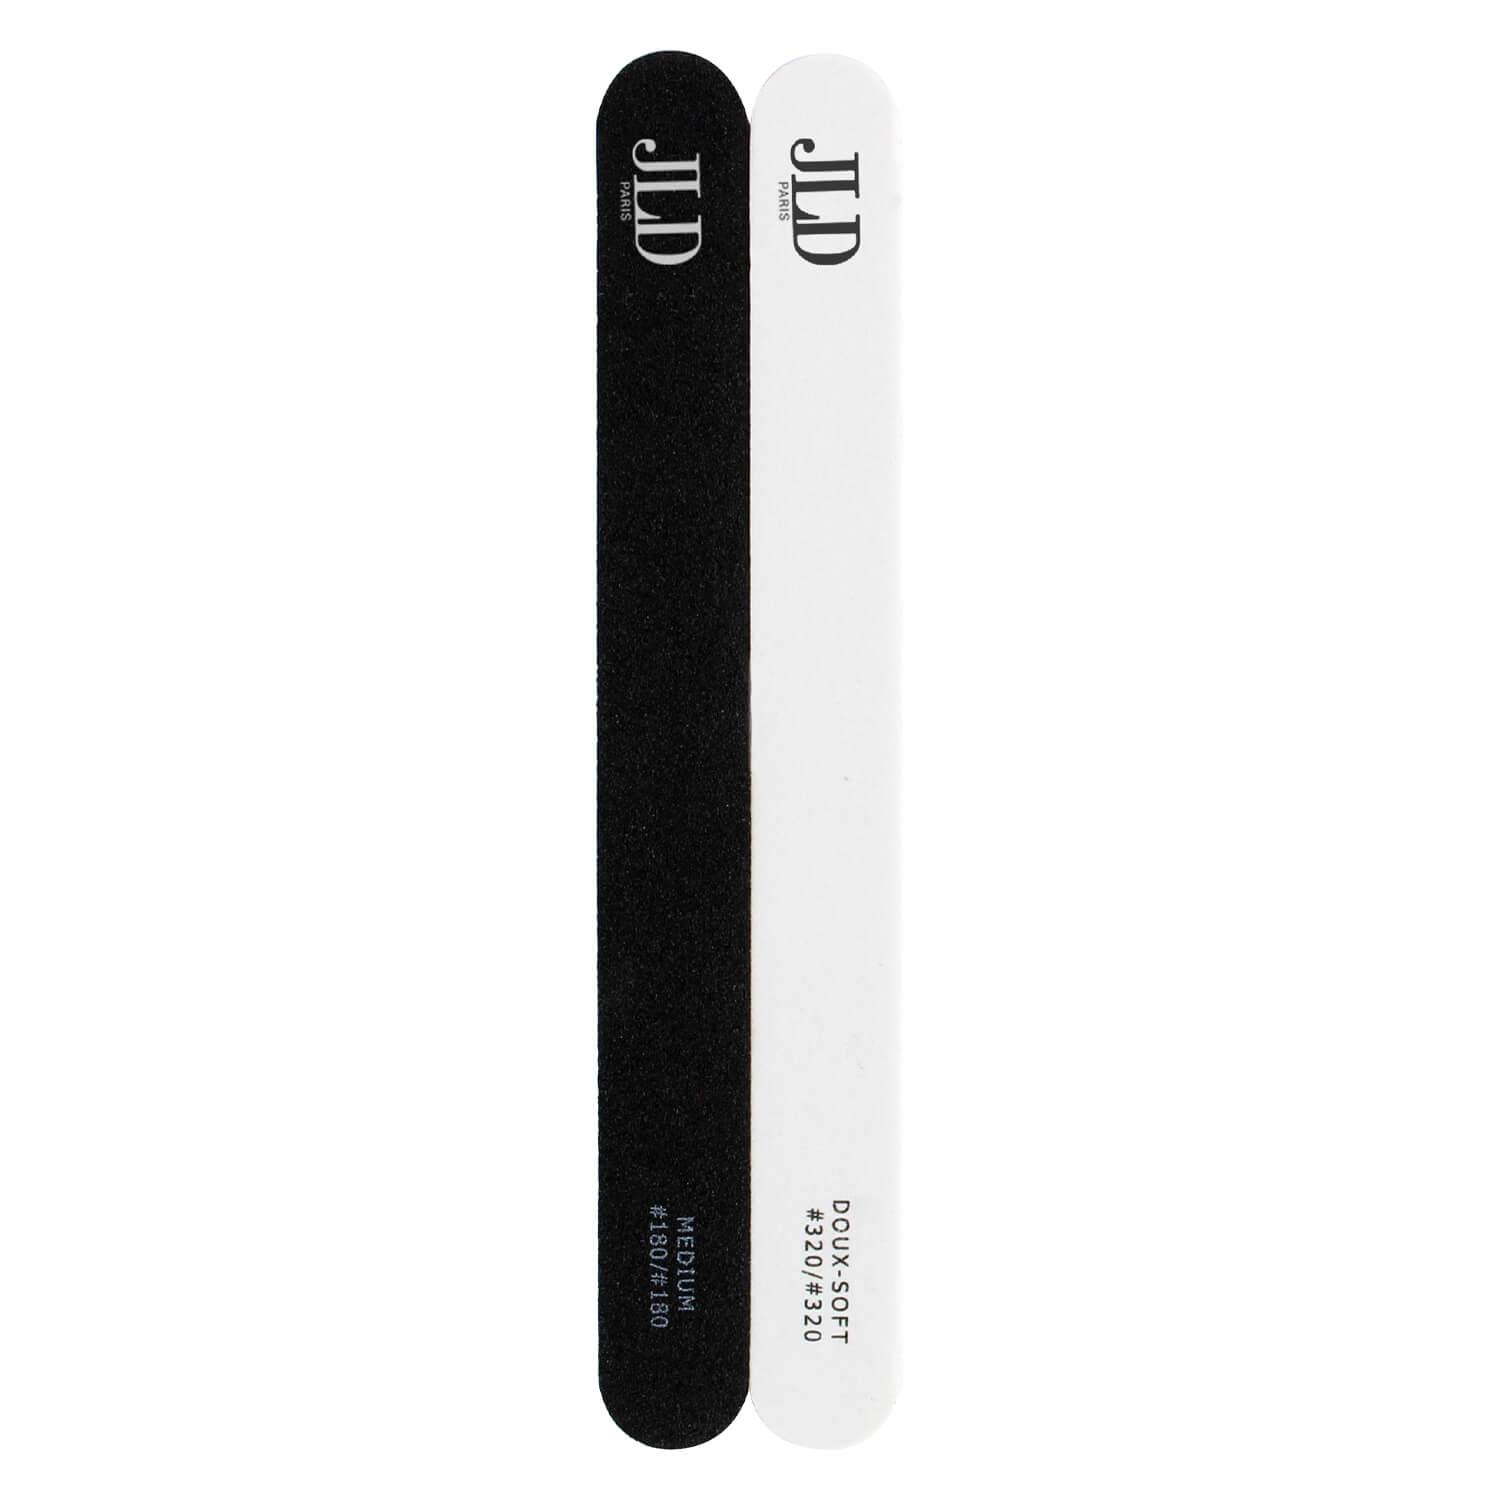 JLD - Double-ended fine and coarse professional nail file